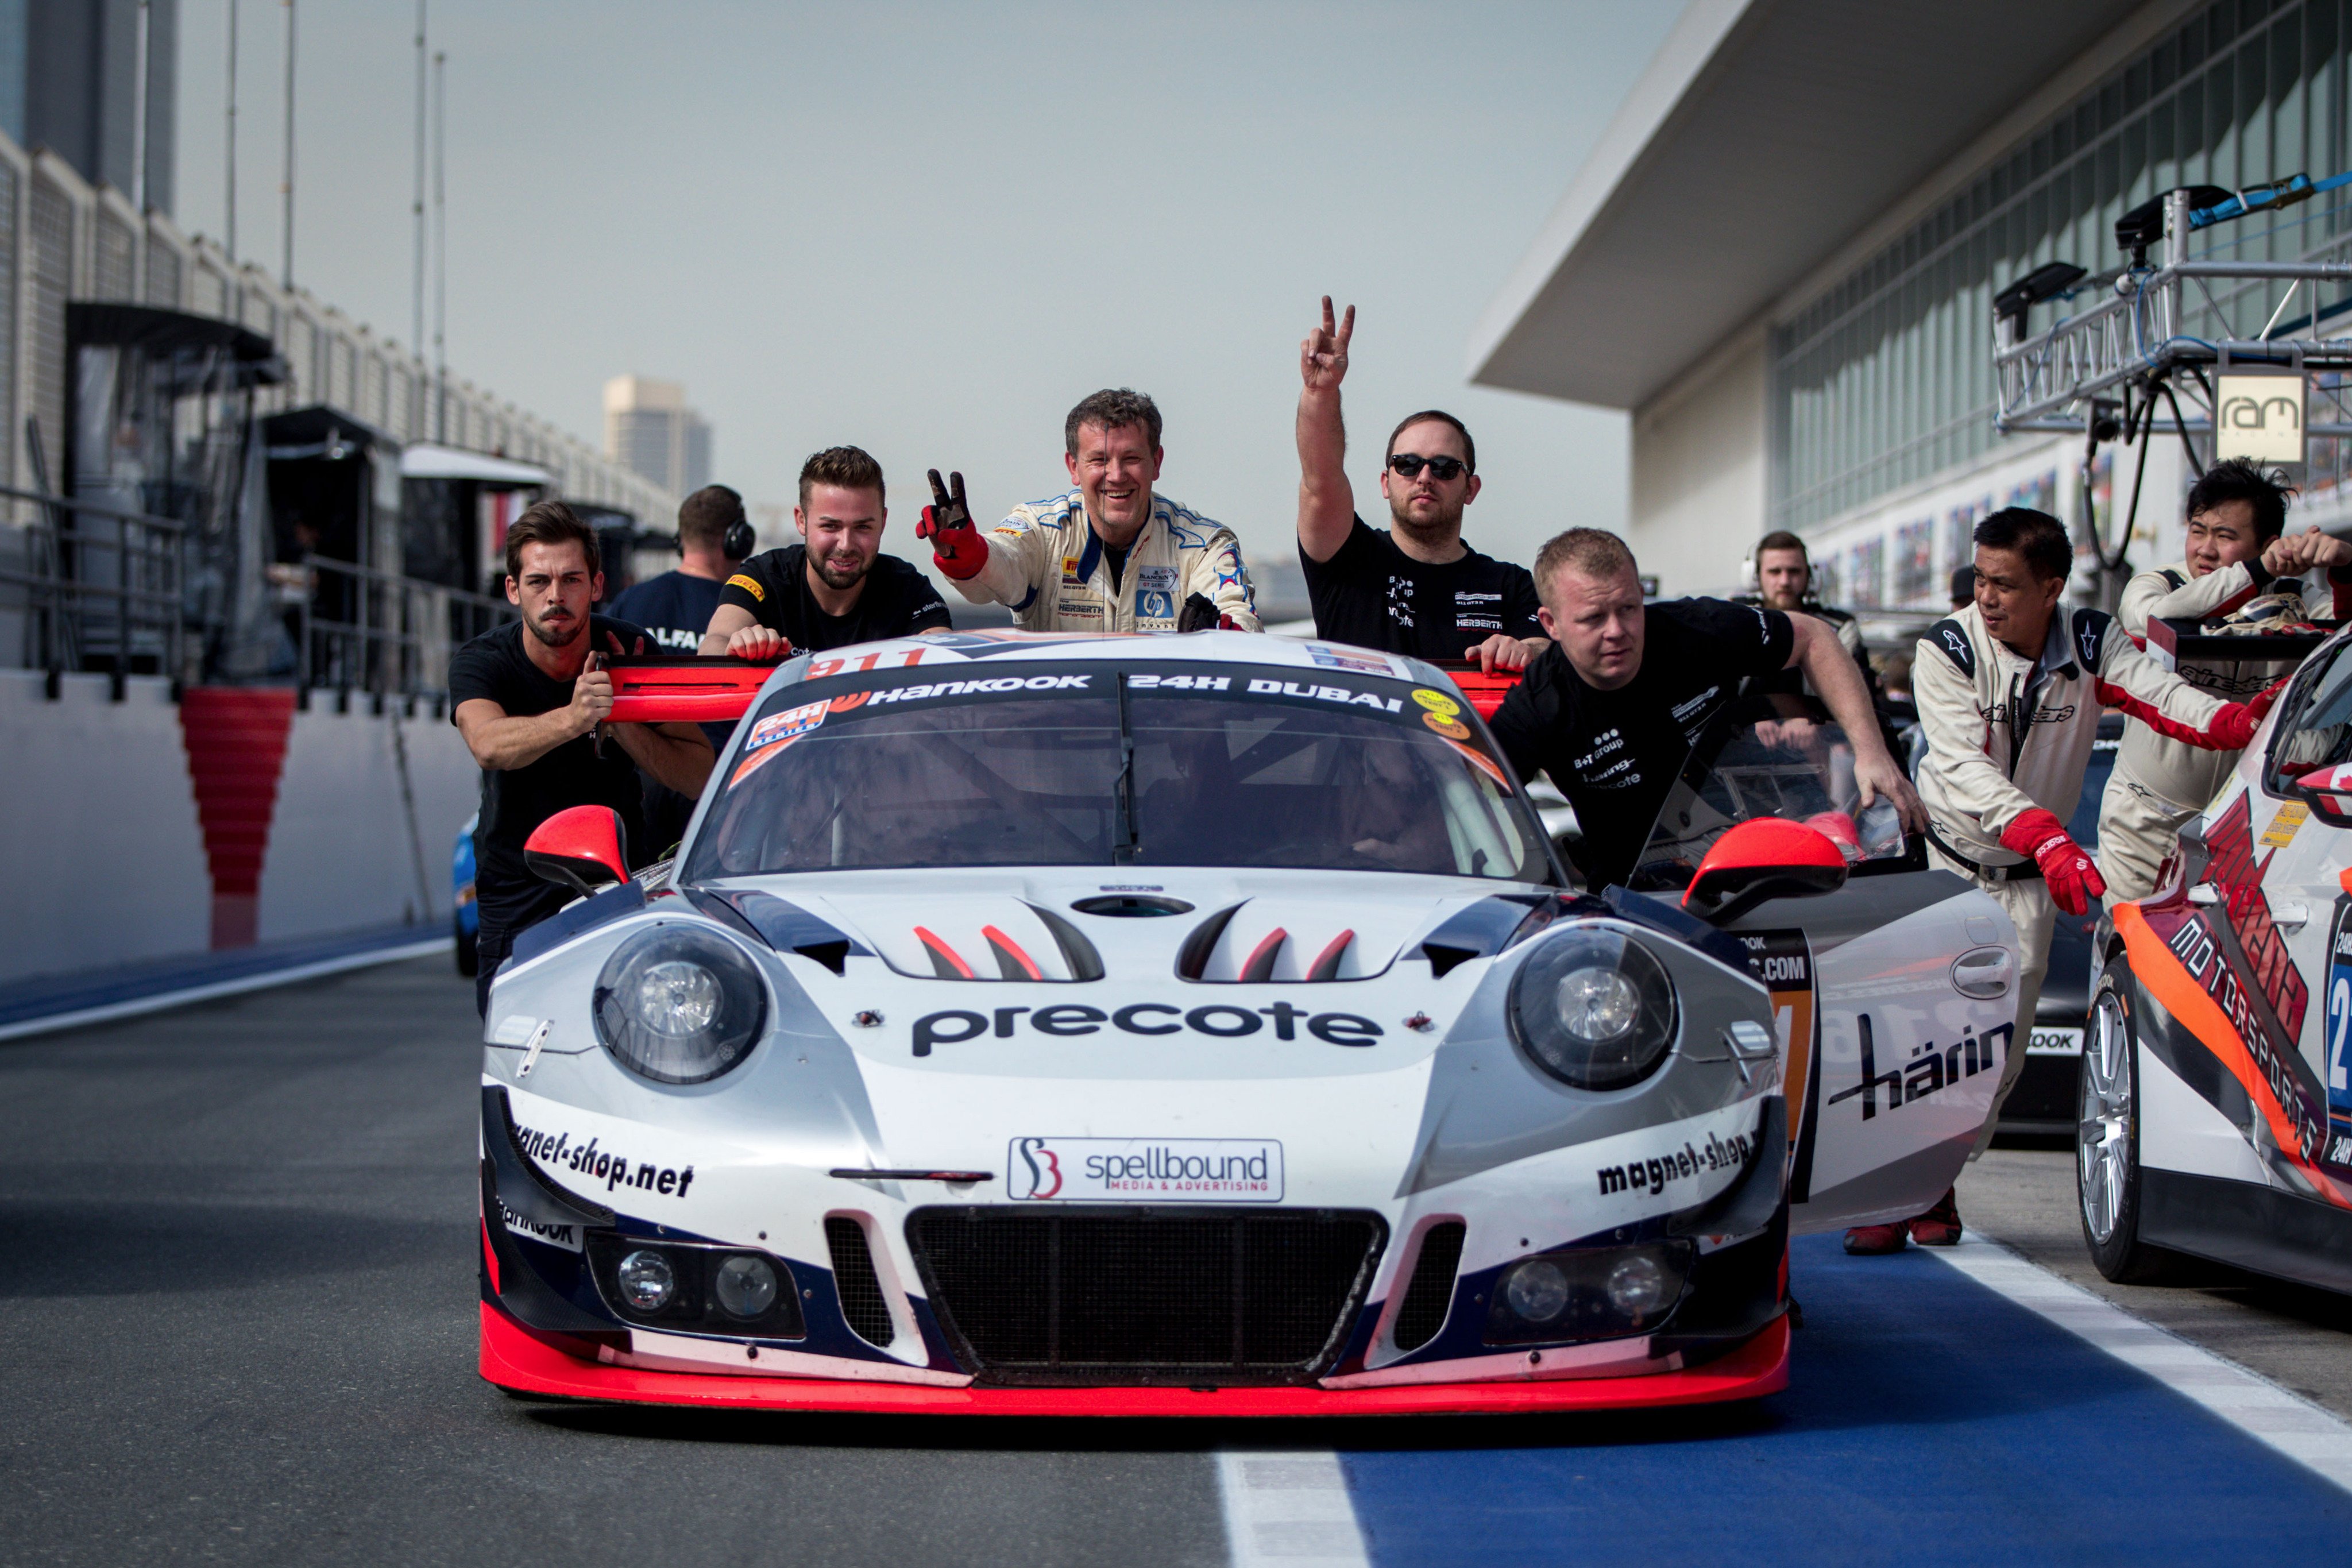 Porsche Motorsport on Twitter: "#24HSERIES - First impressions from the 24H with the @Porsche #911GT3R. The endurance race takes place for the 13th time Dubai Autodrome. @Dubai_Autodrome @24HSERIES @PorscheNewsroom @